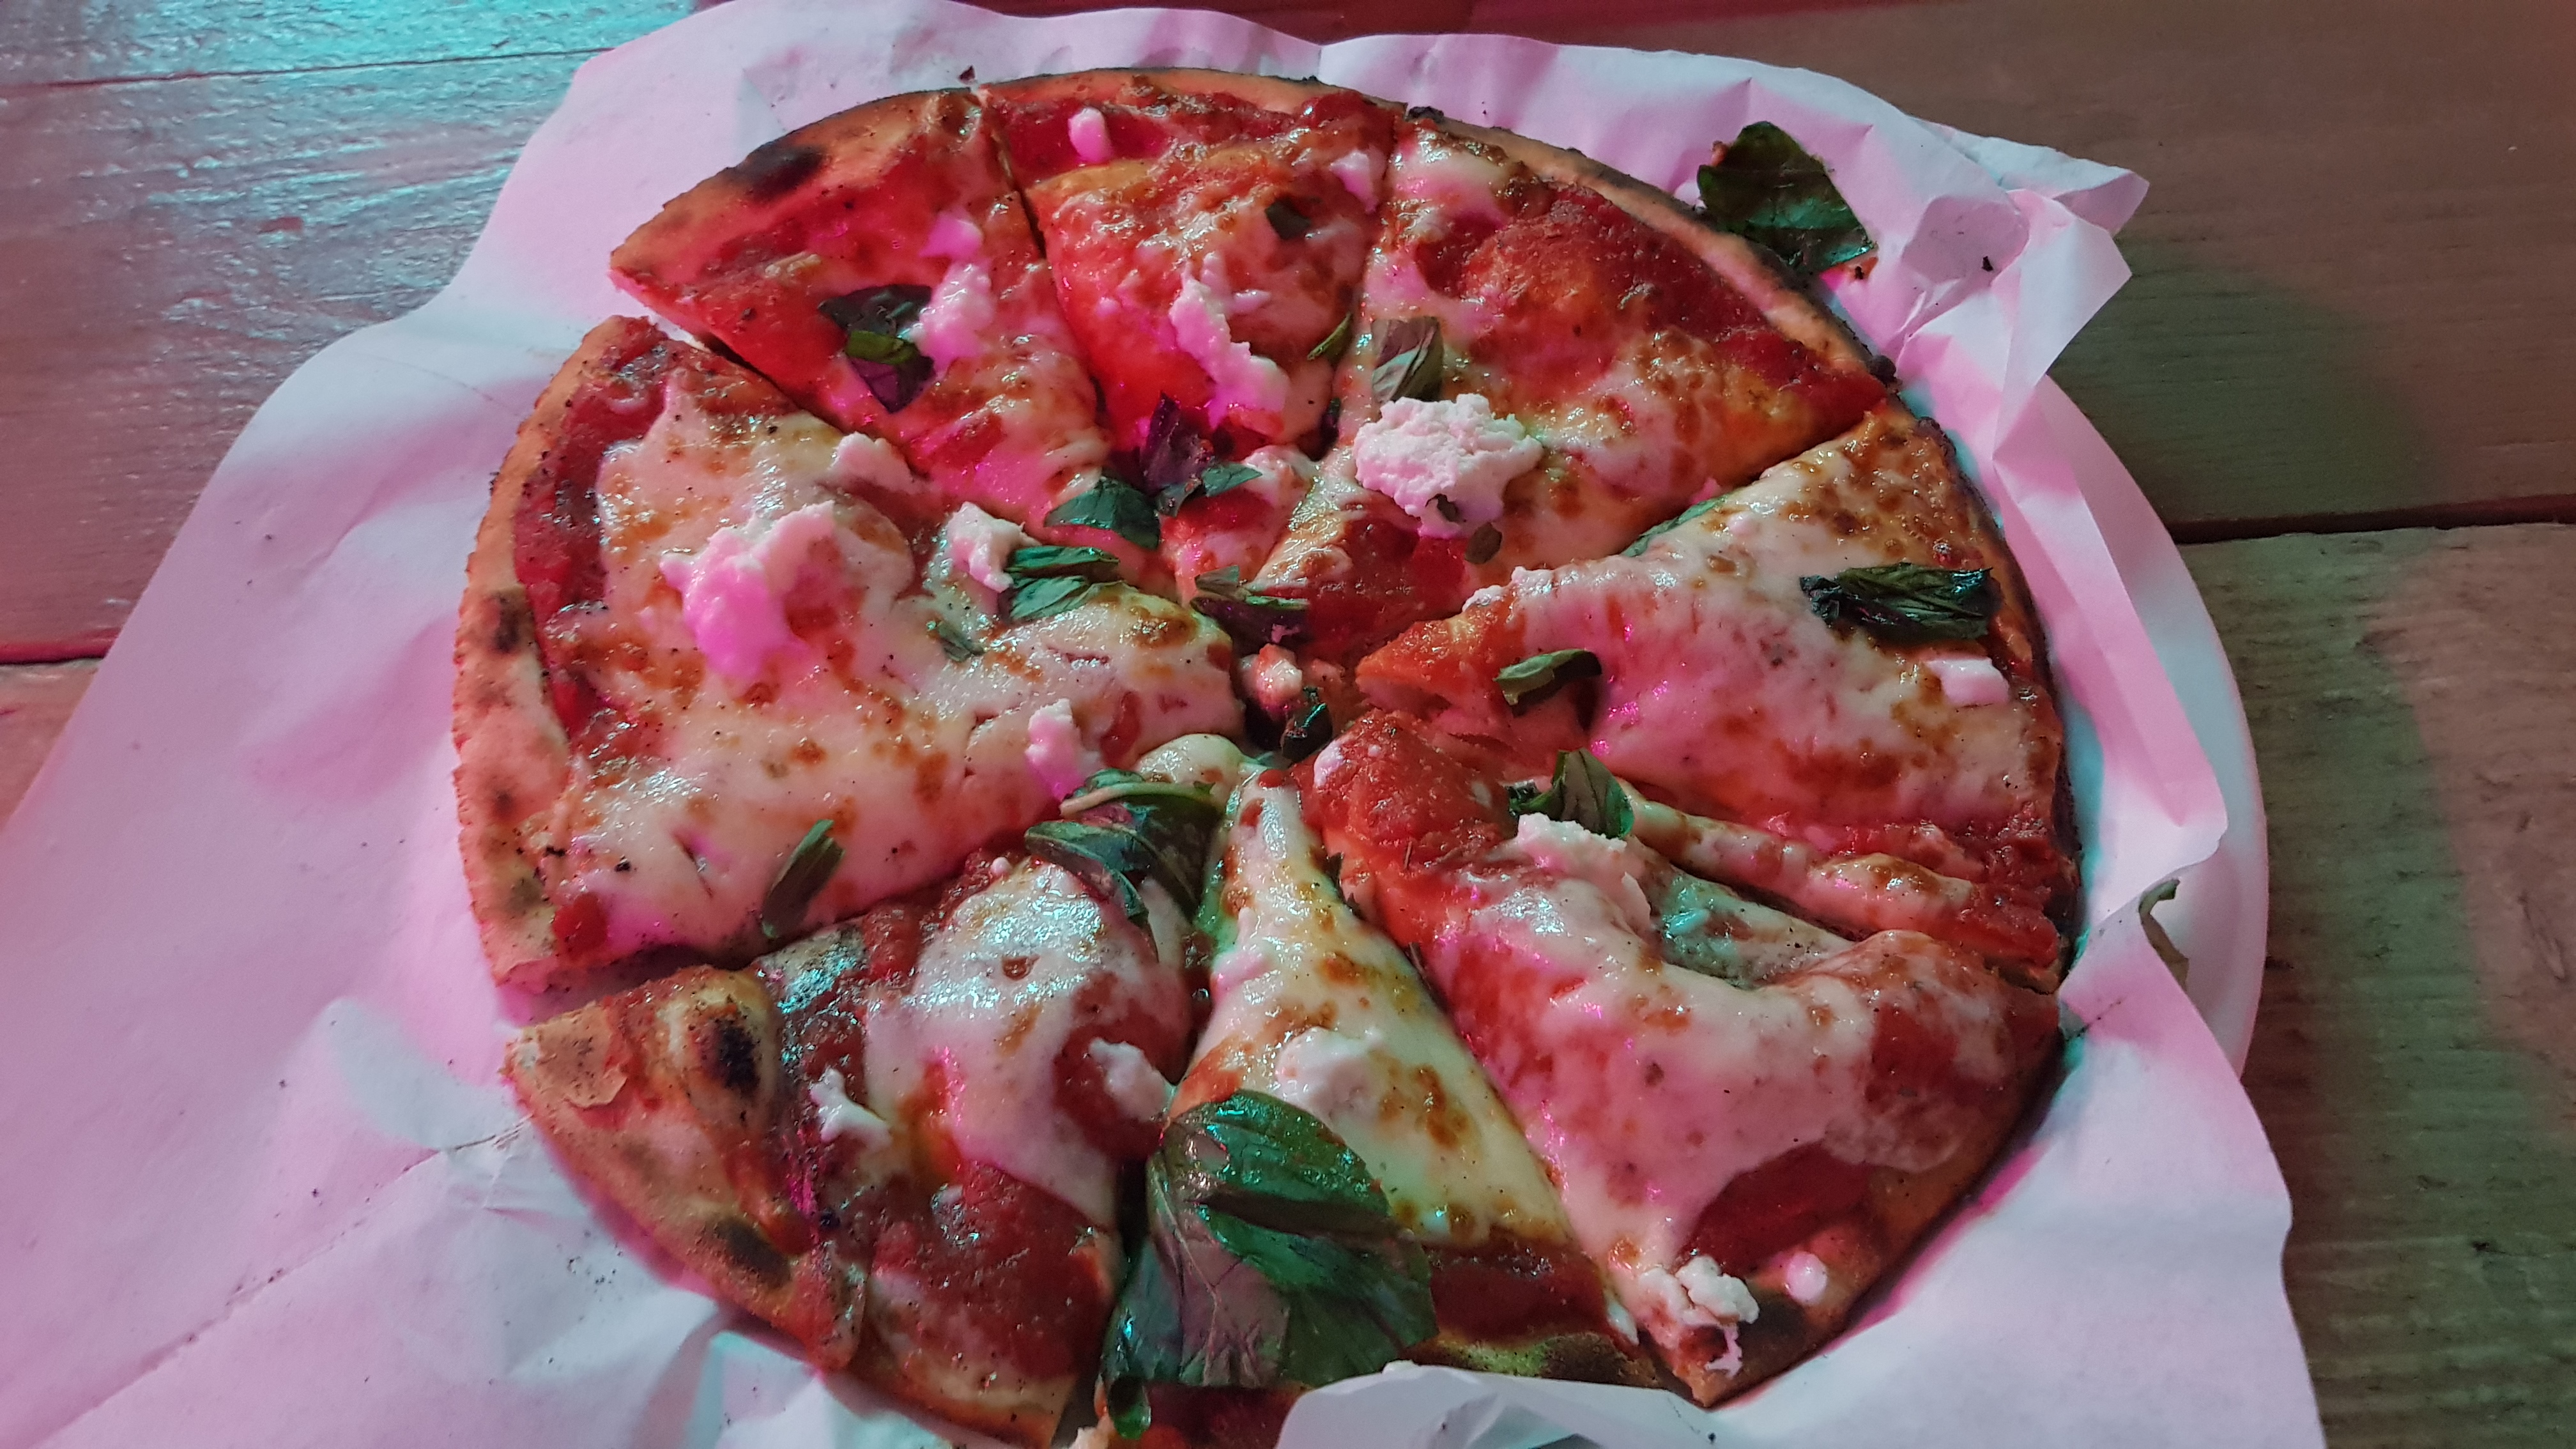 A margherita pizza with tomato sauce, cheese and herbs